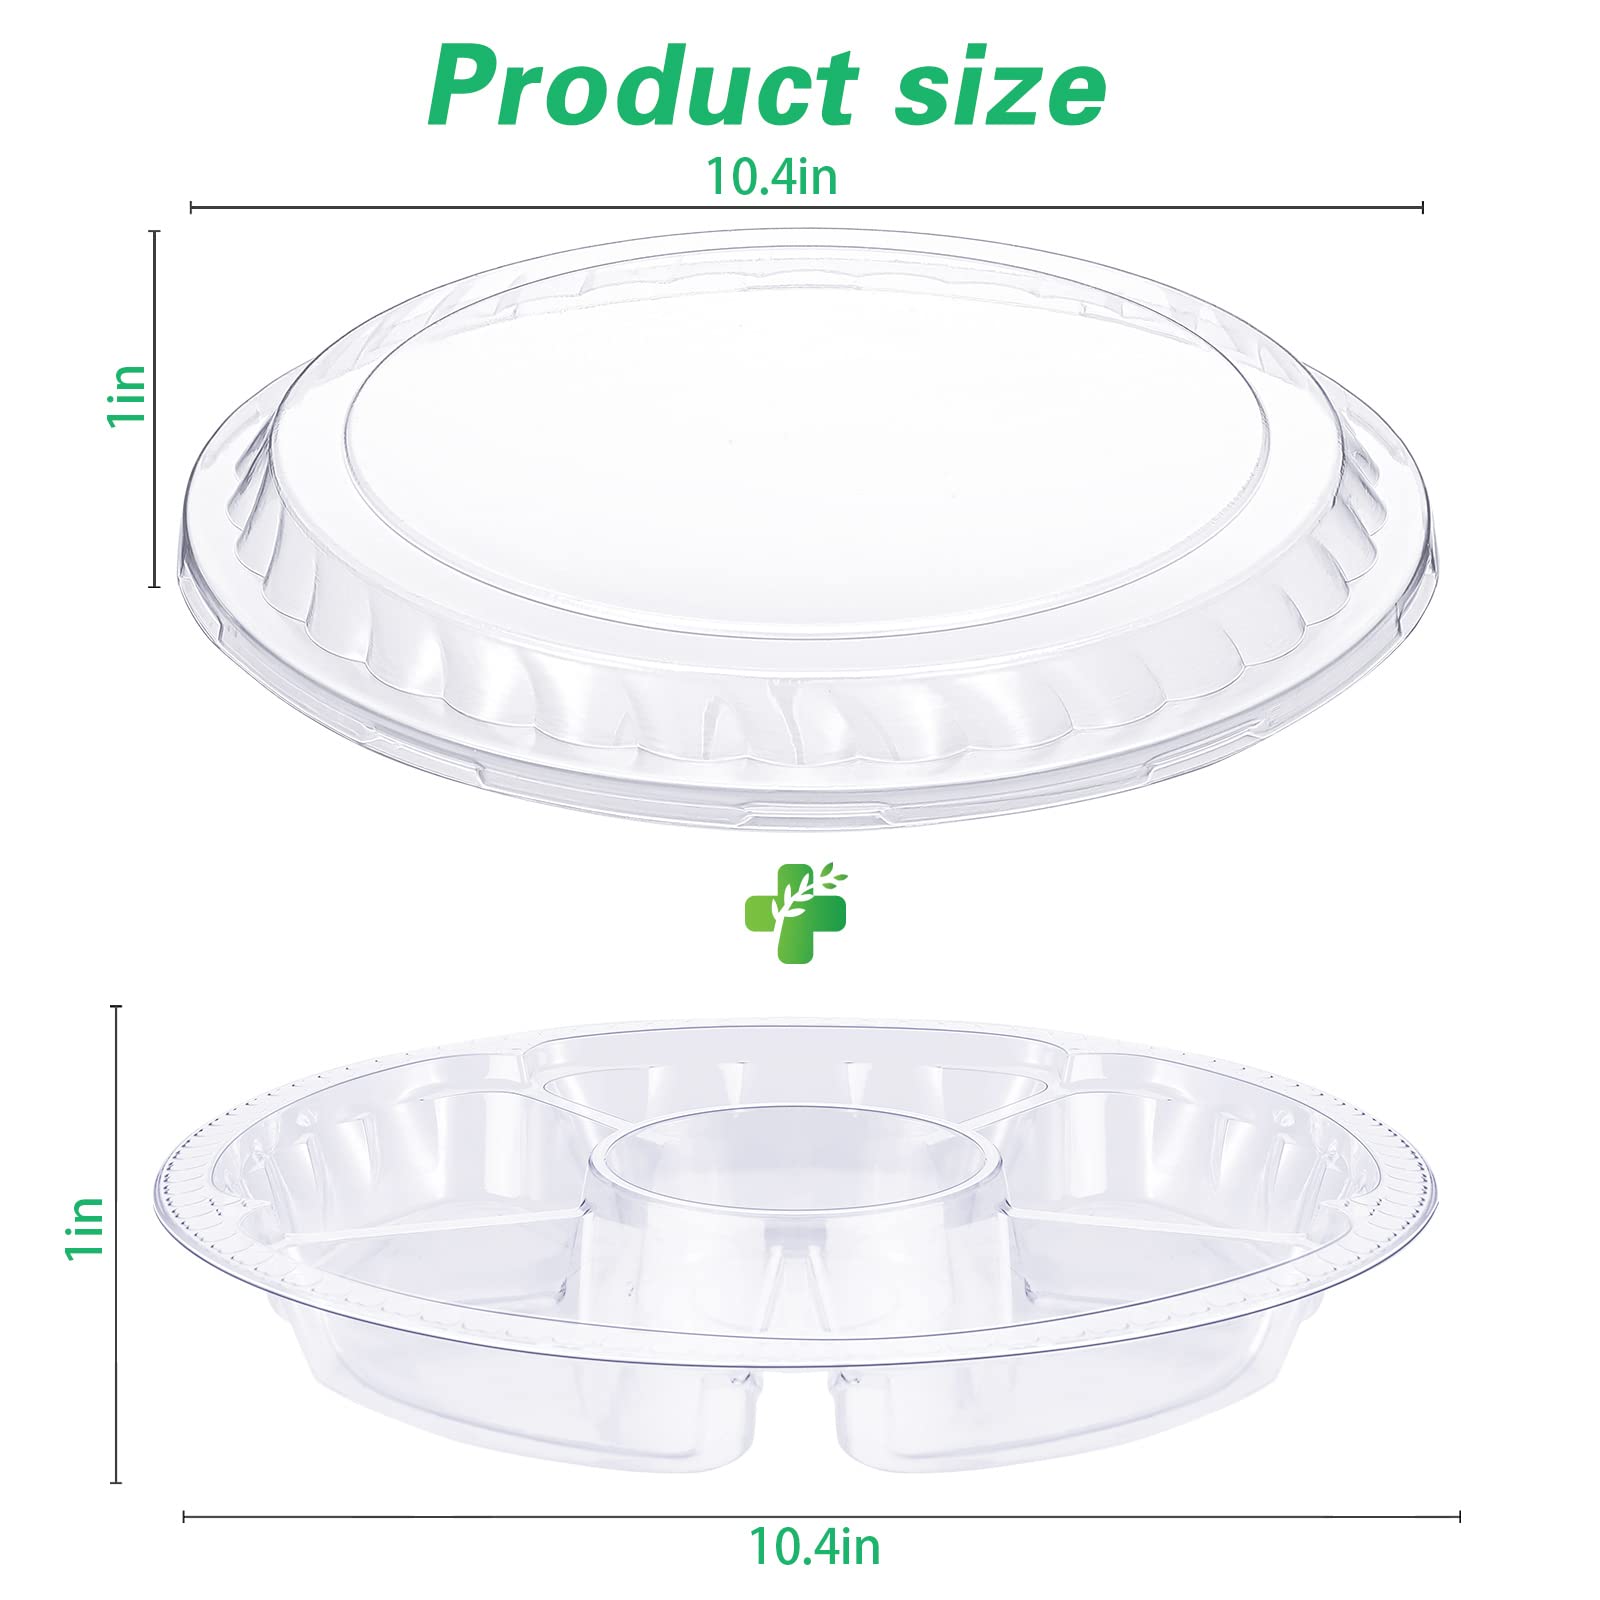 20 Pieces Plastic Appetizer Trays with Lids Disposable Platter Buffet Compartment Serving Tray for Fruit Veggie Snack Food Containers (Clear,6 Grids)